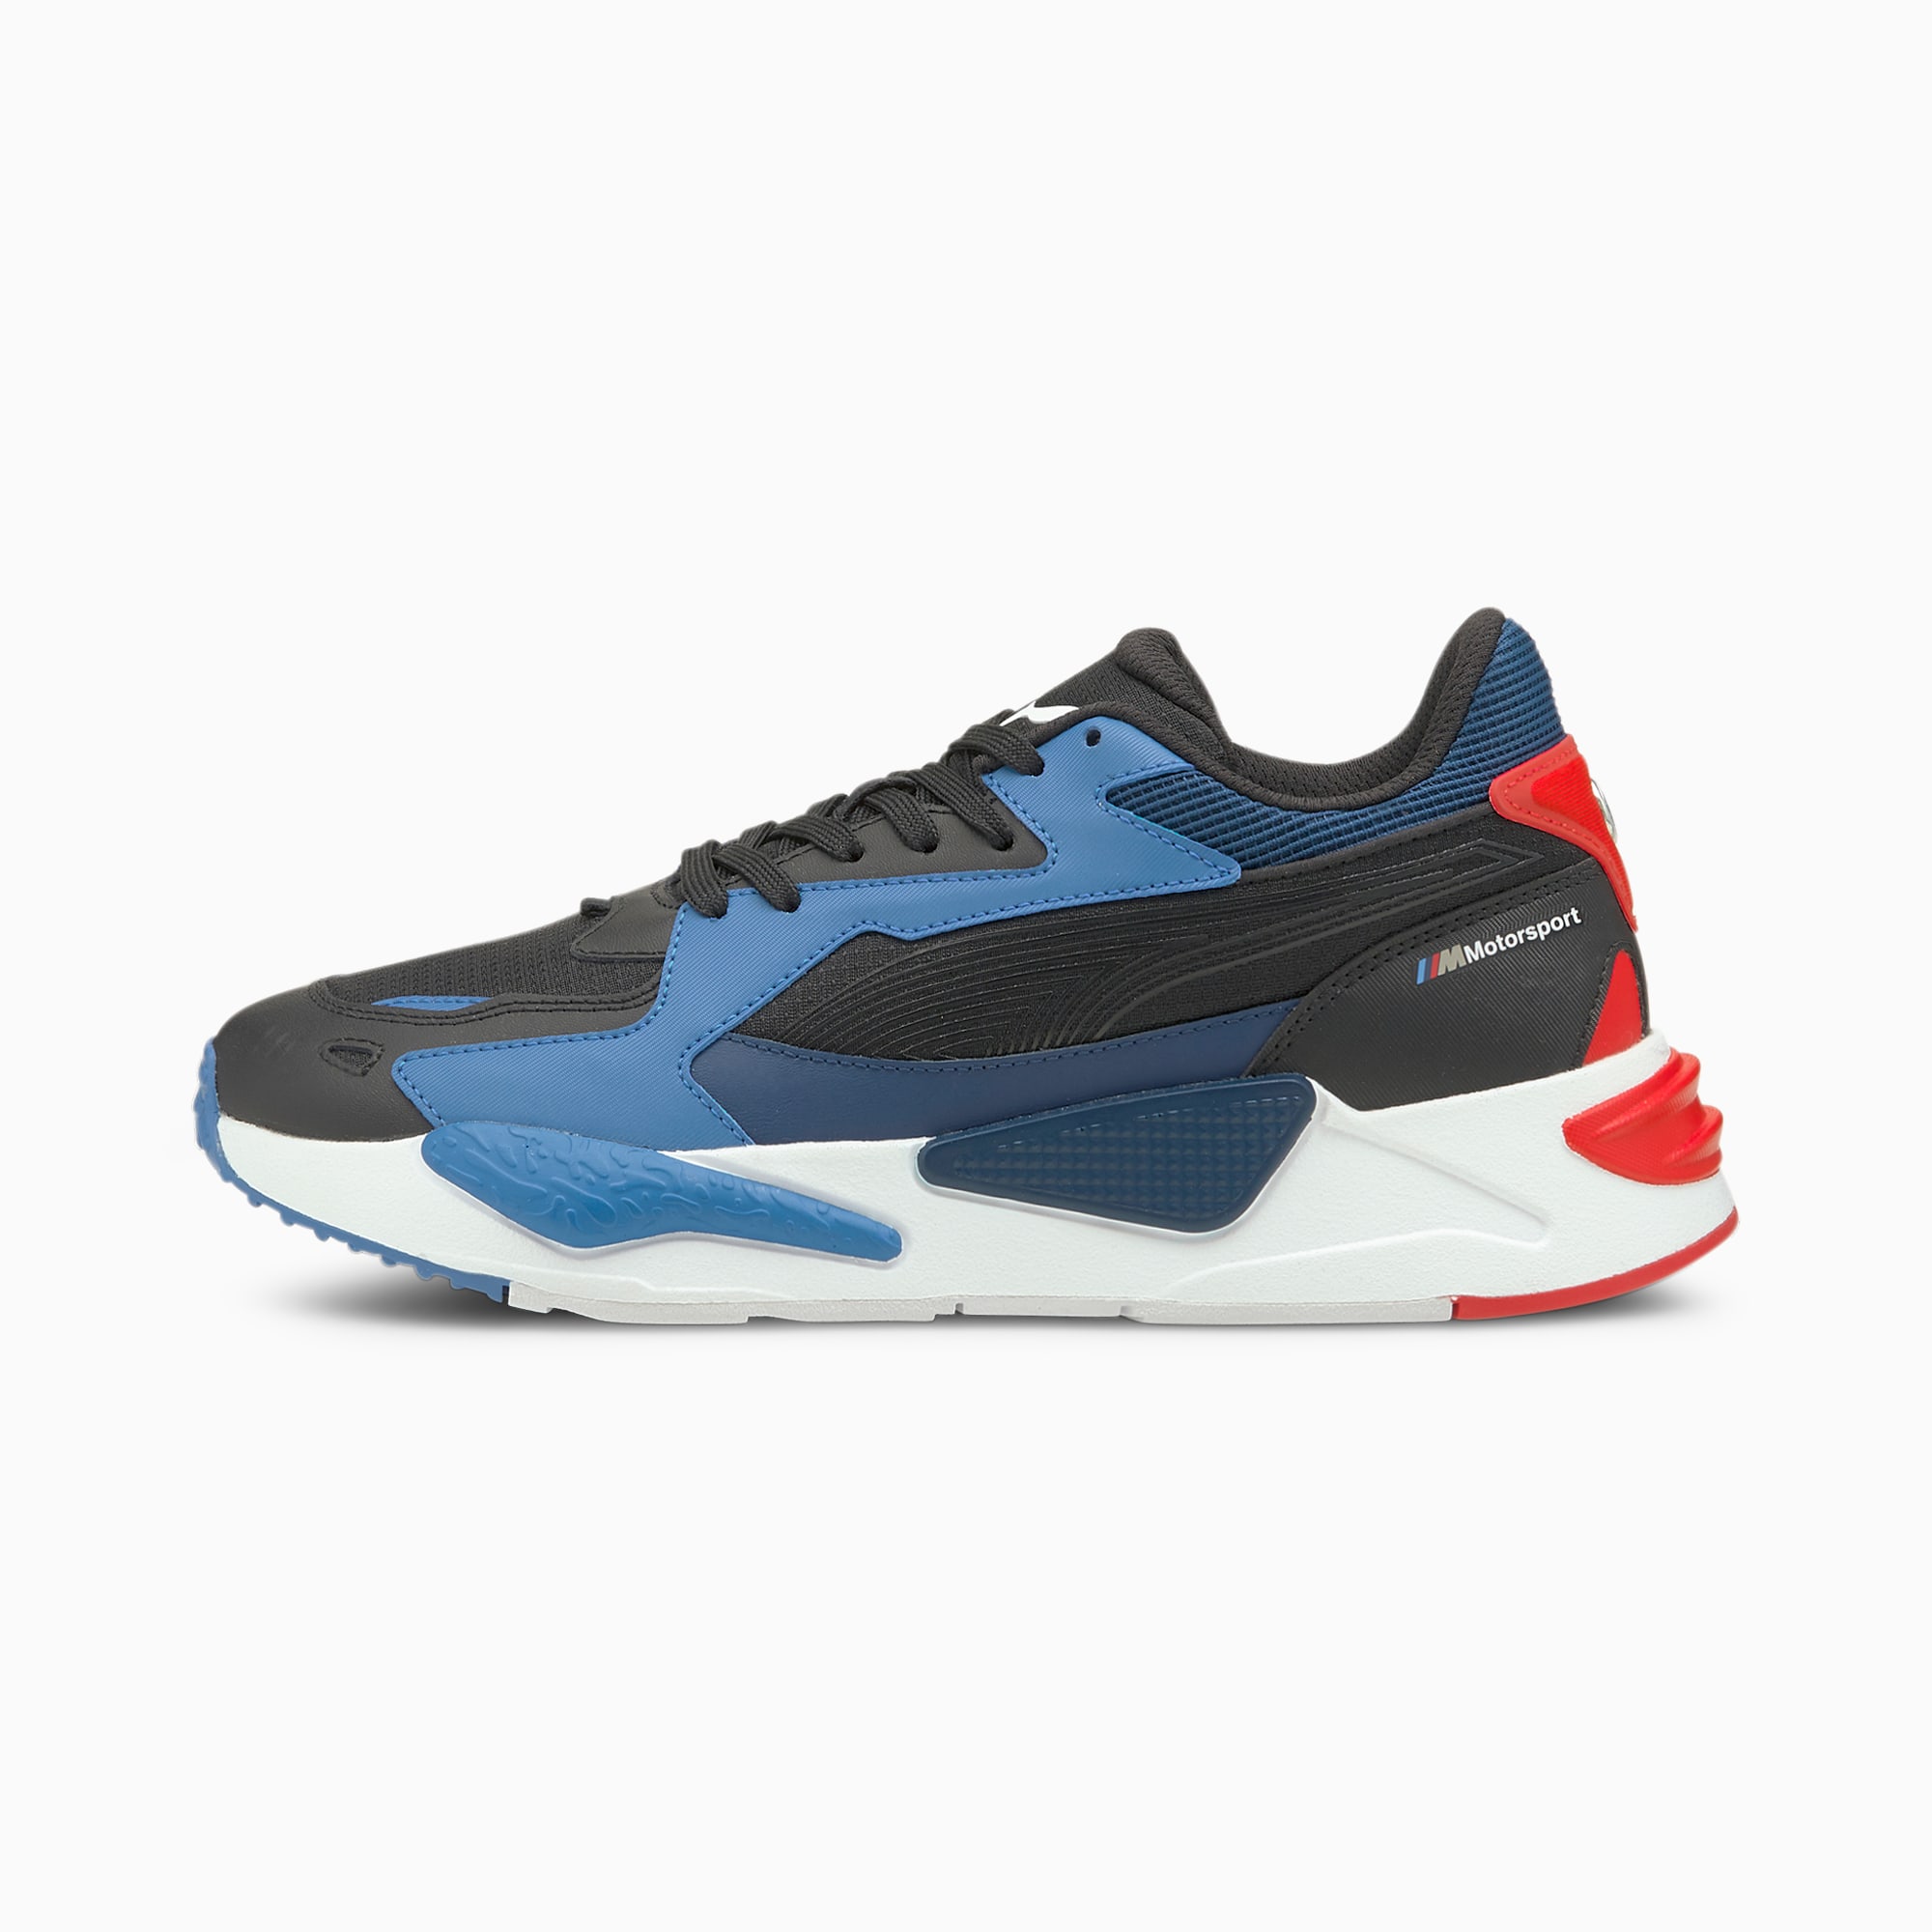 Puma Black-Strong Blue-Fiery Red